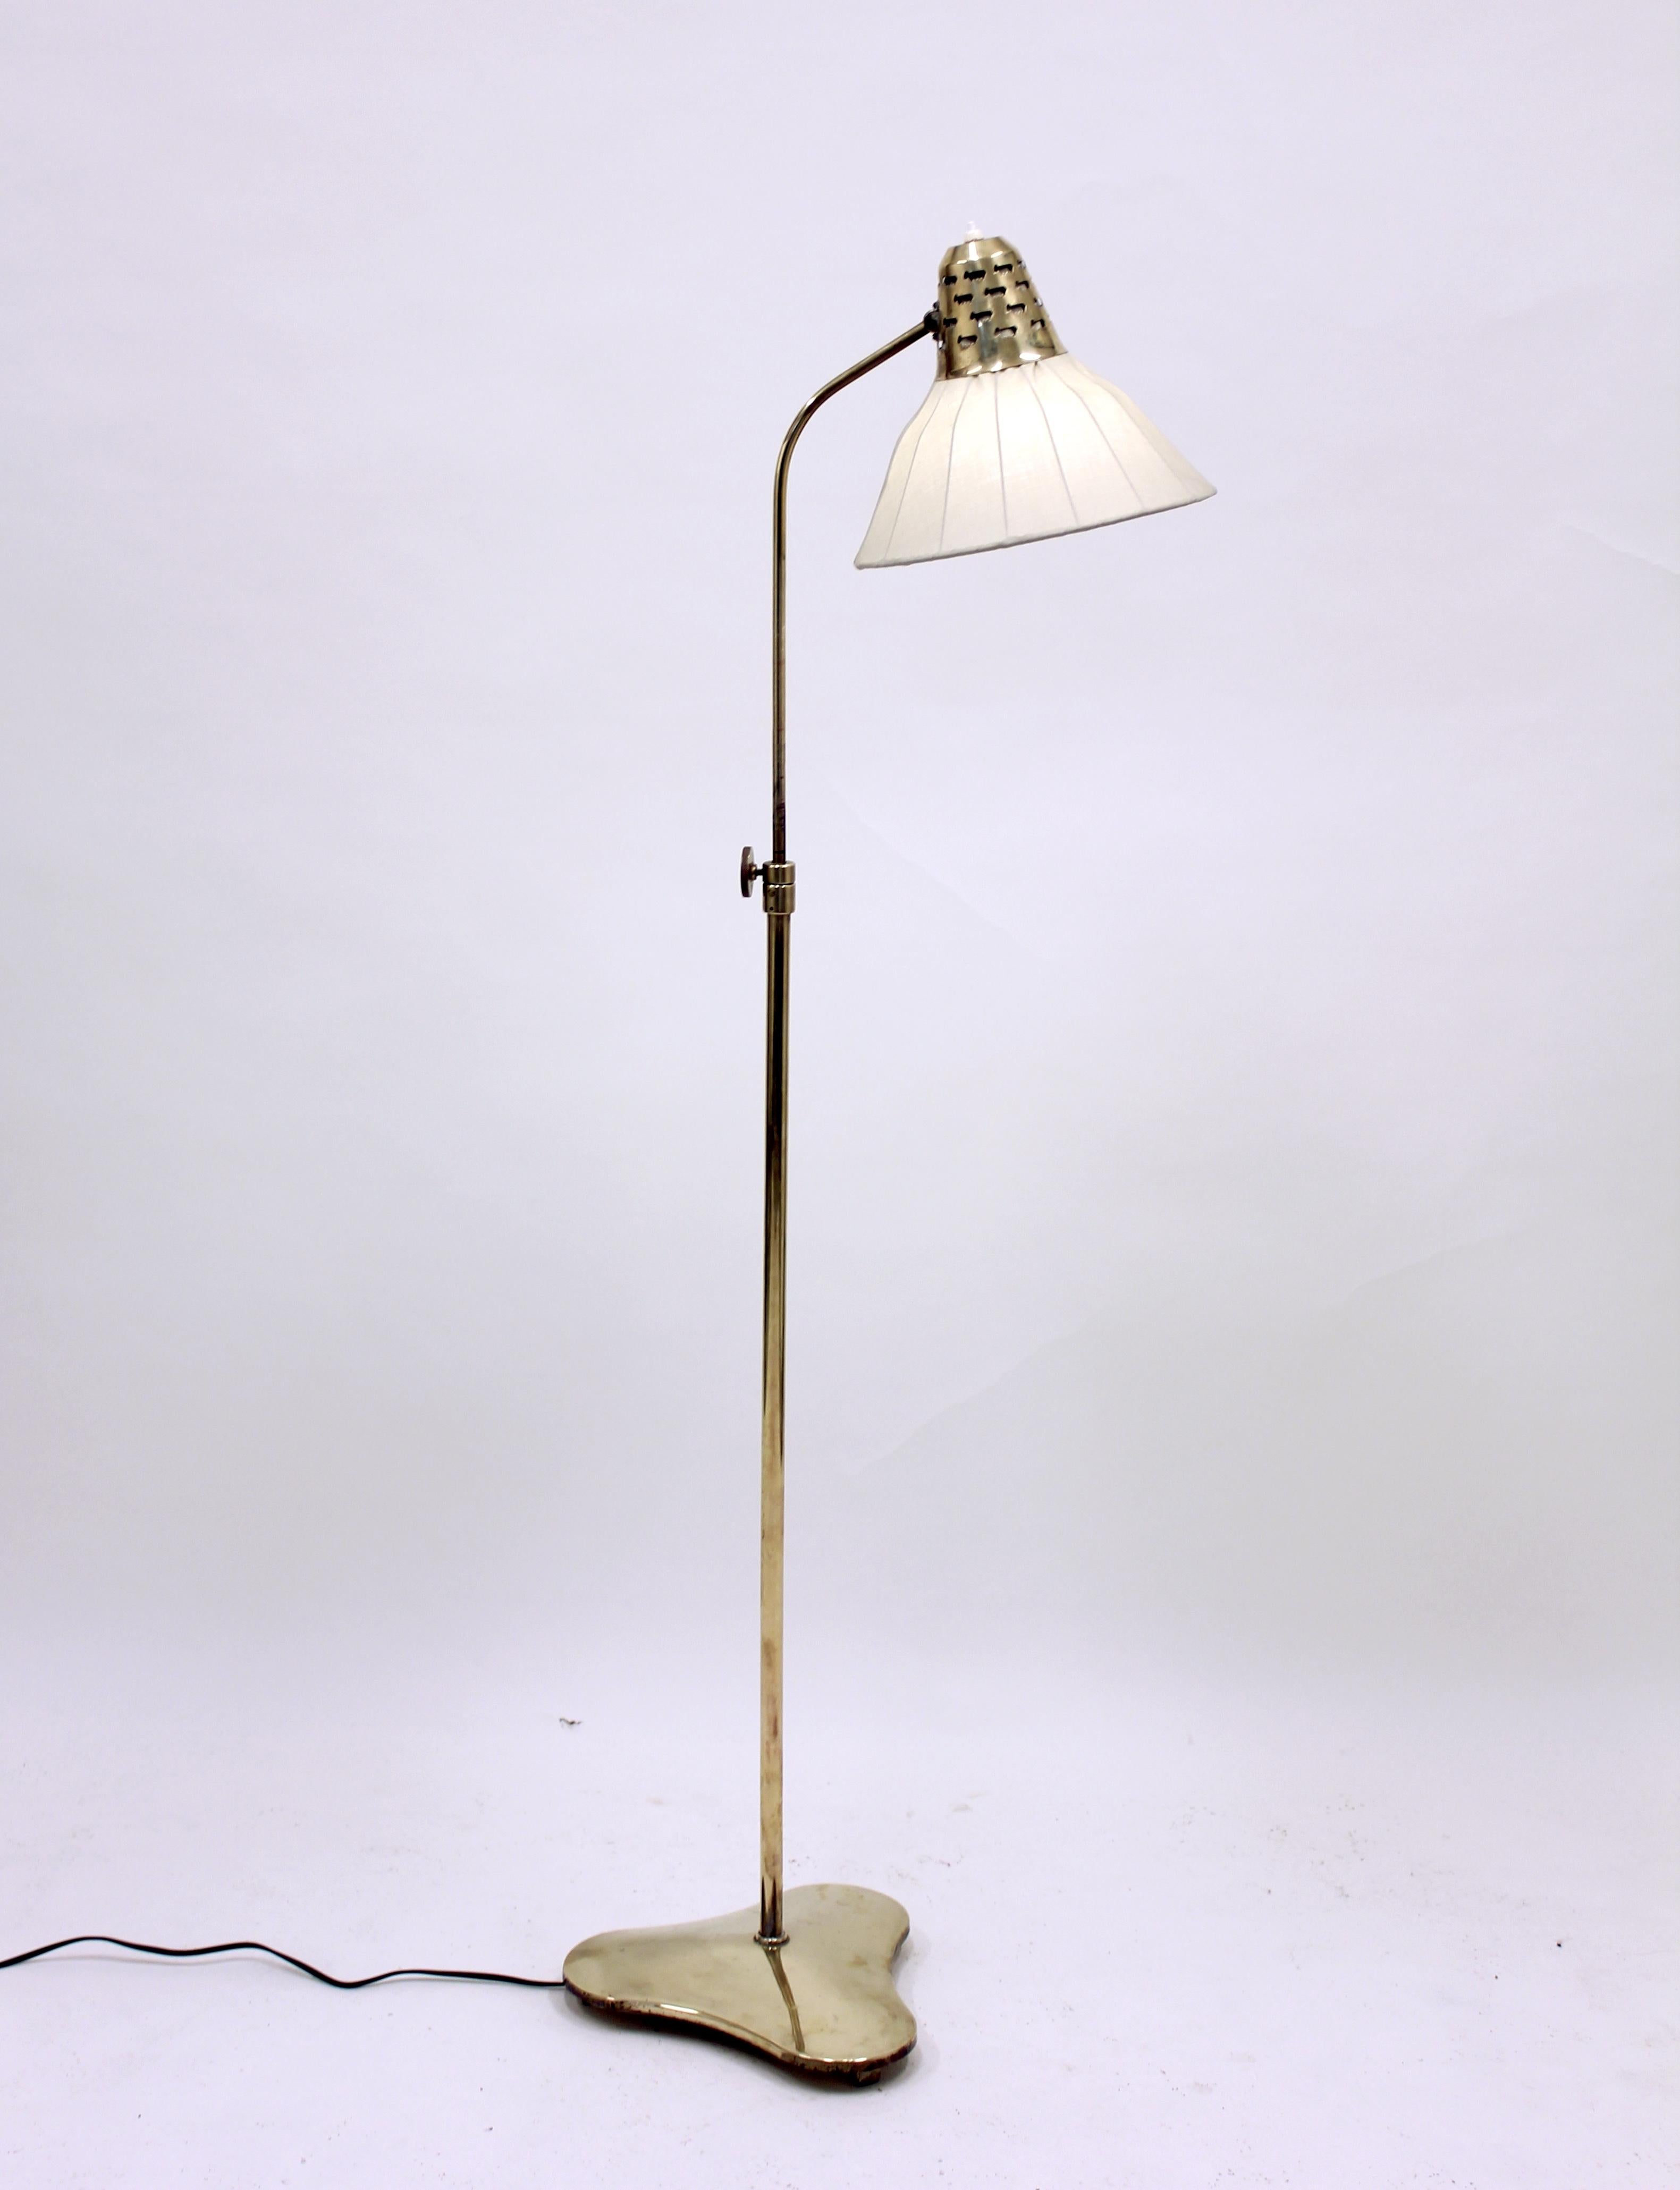 Brass floor lamp with clover shaped base and external brass bulb holder with relief holes depicting sheeps. Height adjustable between 122-147 cm. Newly polished brass with original shade and fabric. New wiring and electric components. Very good